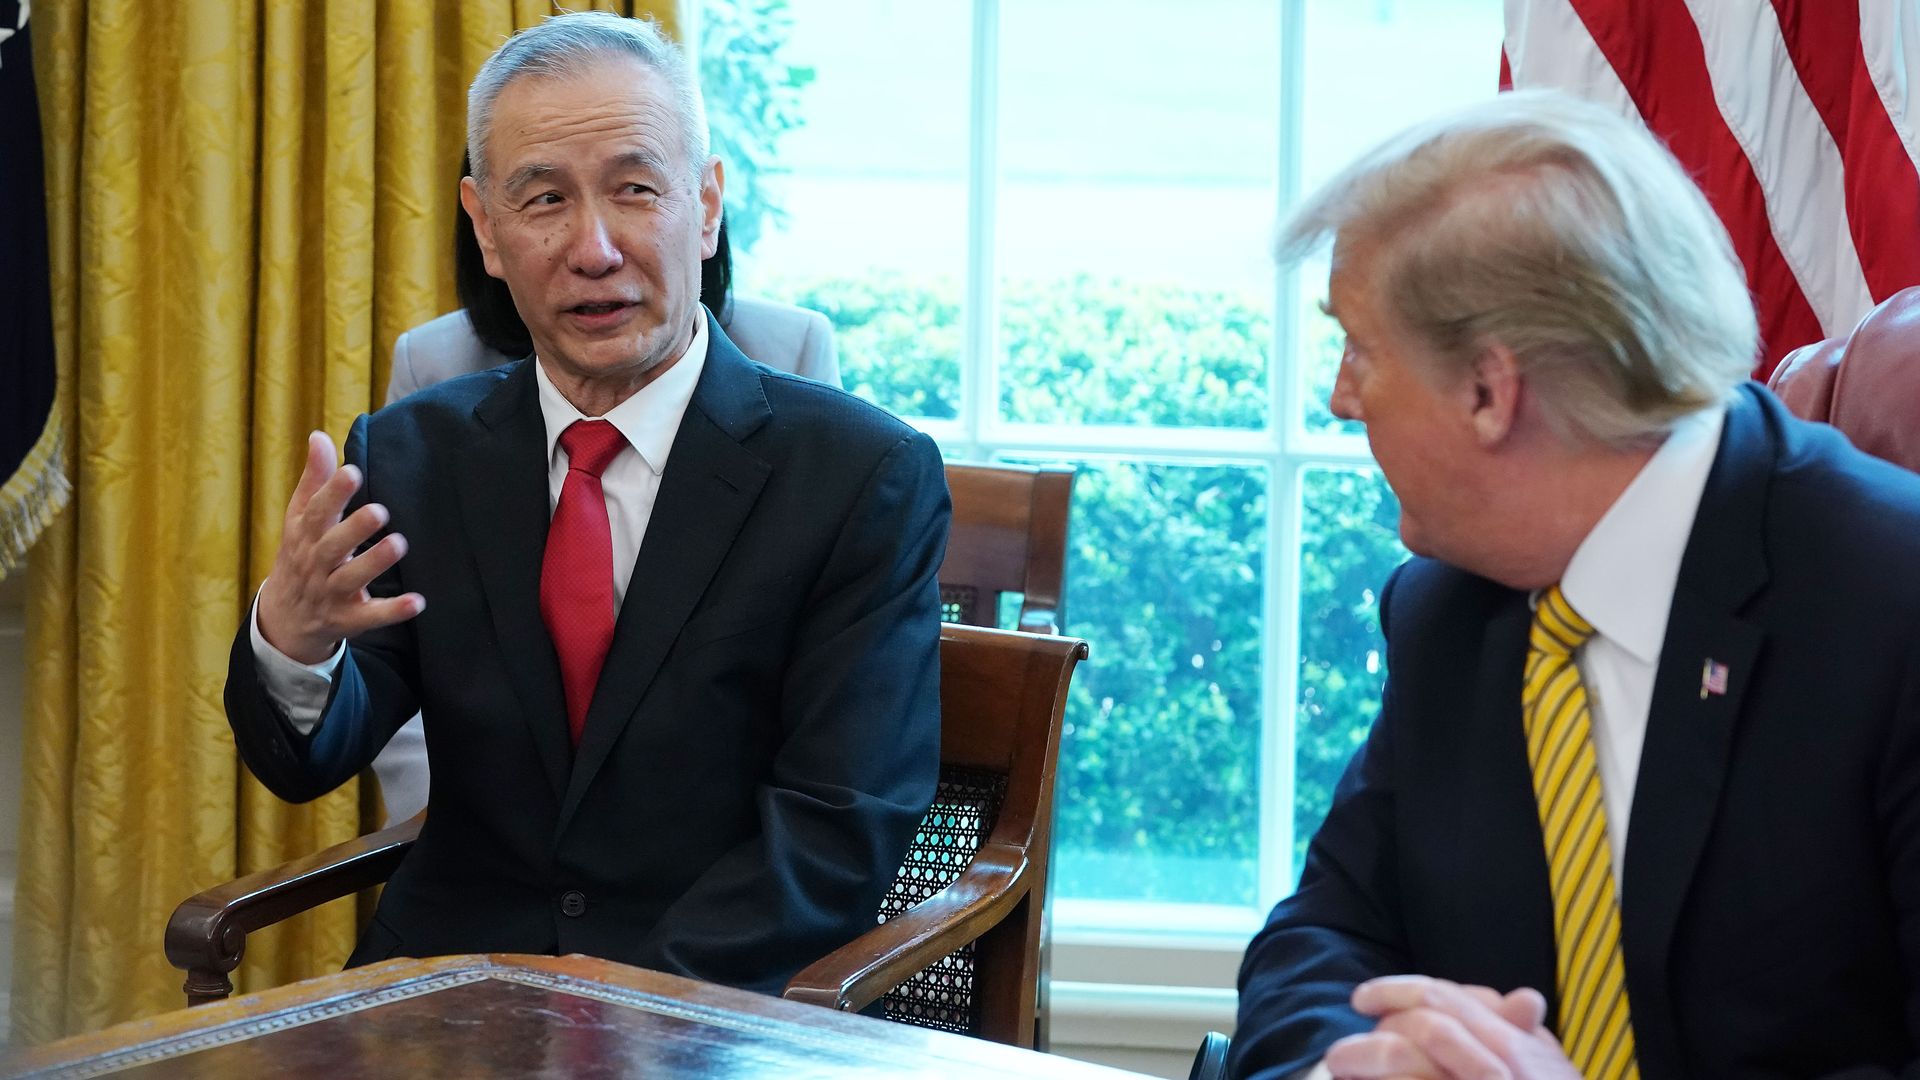 In this image, Trump sits at his desk in the Oval Office and listens to Liu He.